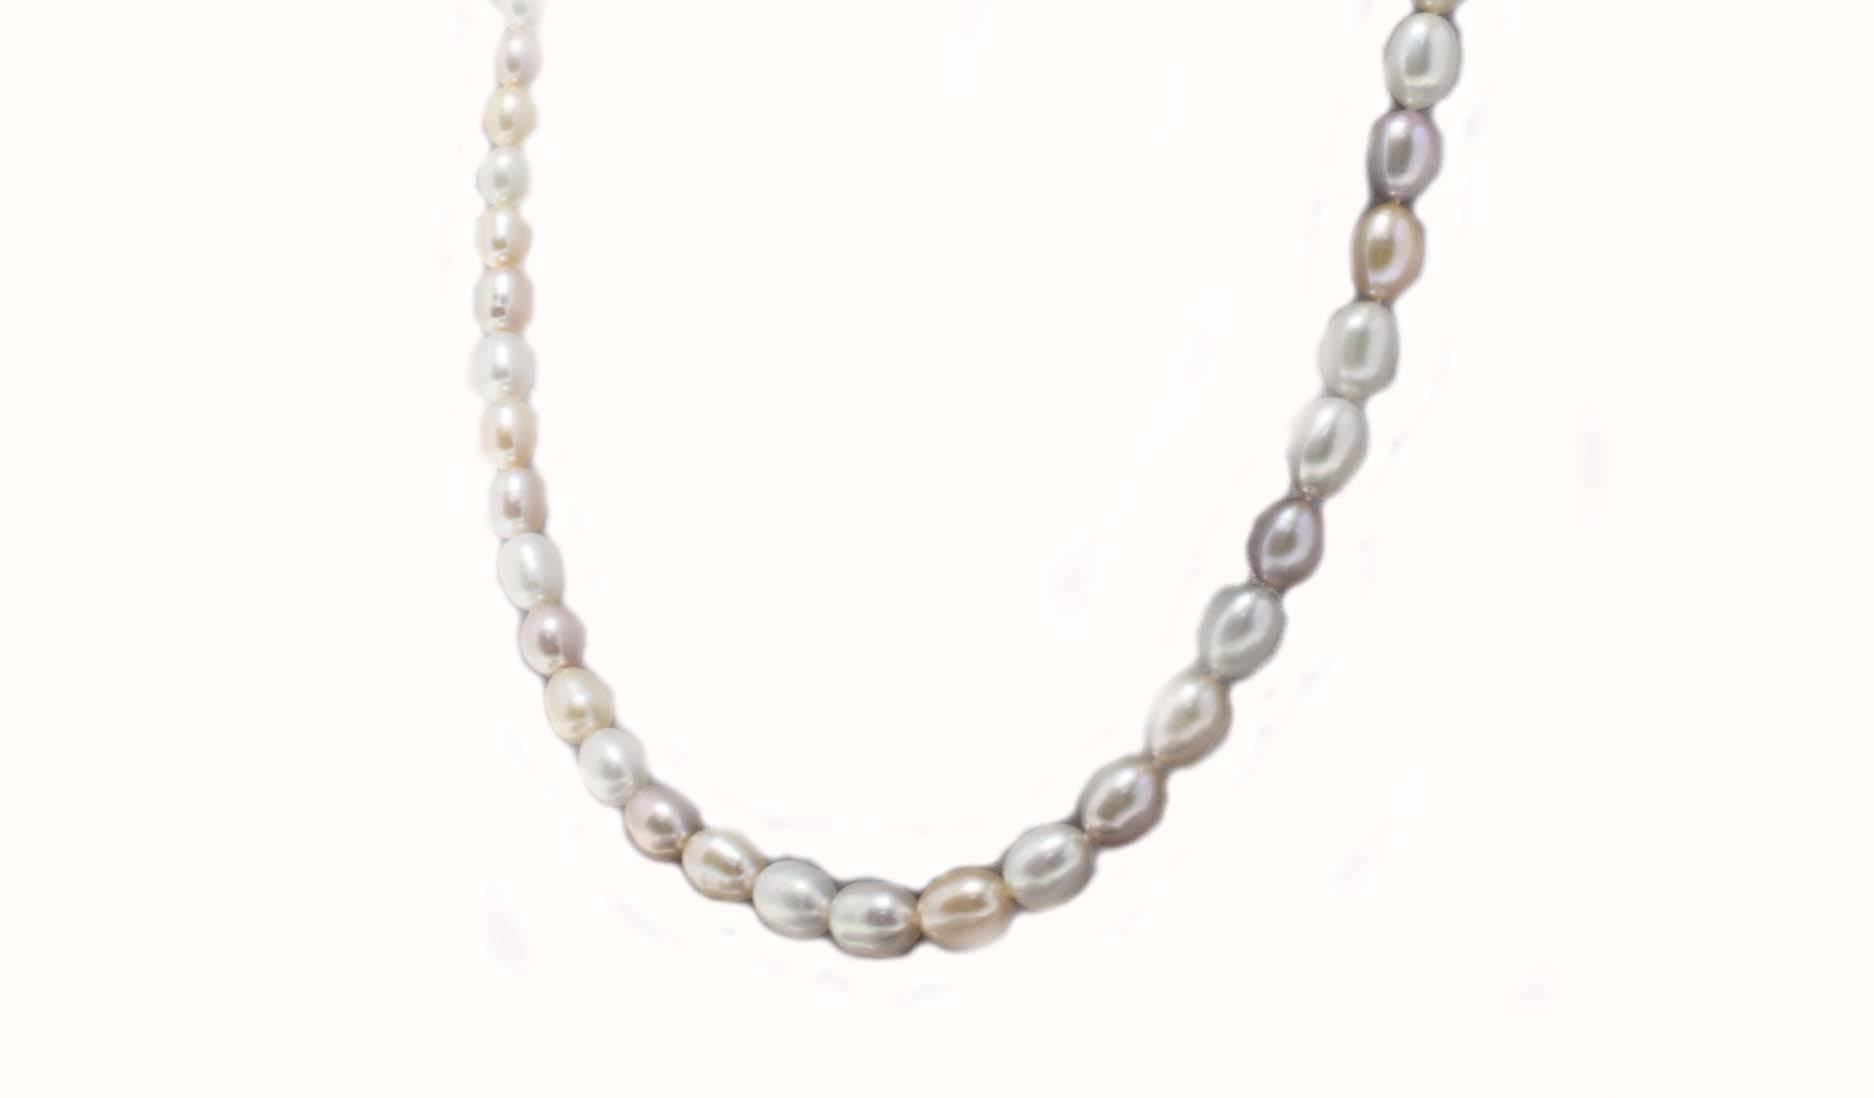 Classic beaded necklace composed of a single strand of light colored pearls. 
Tot length 44 cm
Tot weight 88.70 g
R.F guo